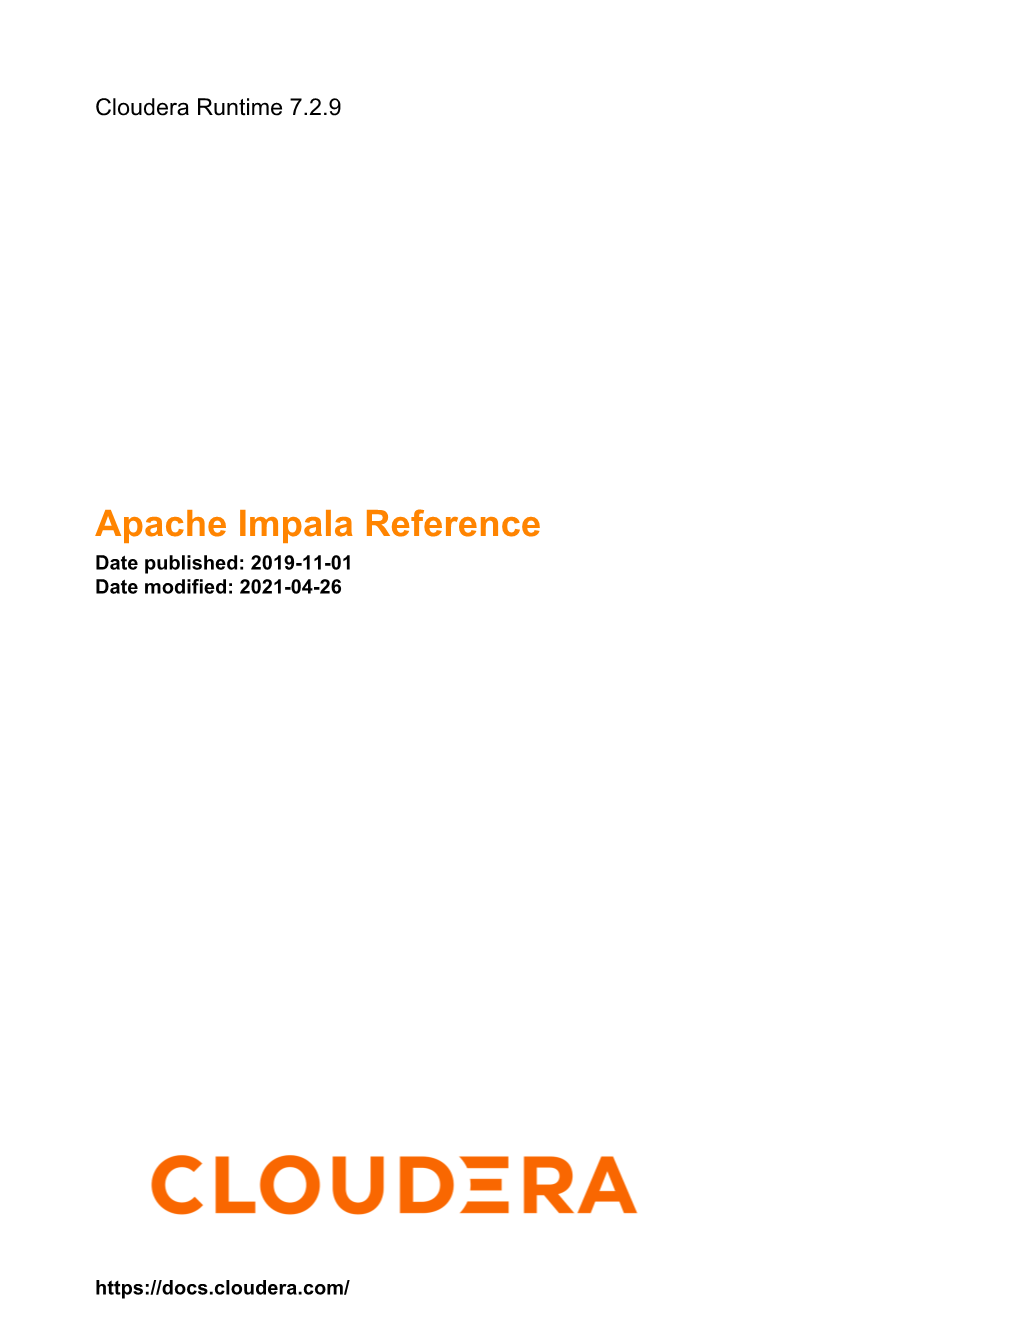 Apache Impala Reference Date Published: 2019-11-01 Date Modified: 2021-04-26